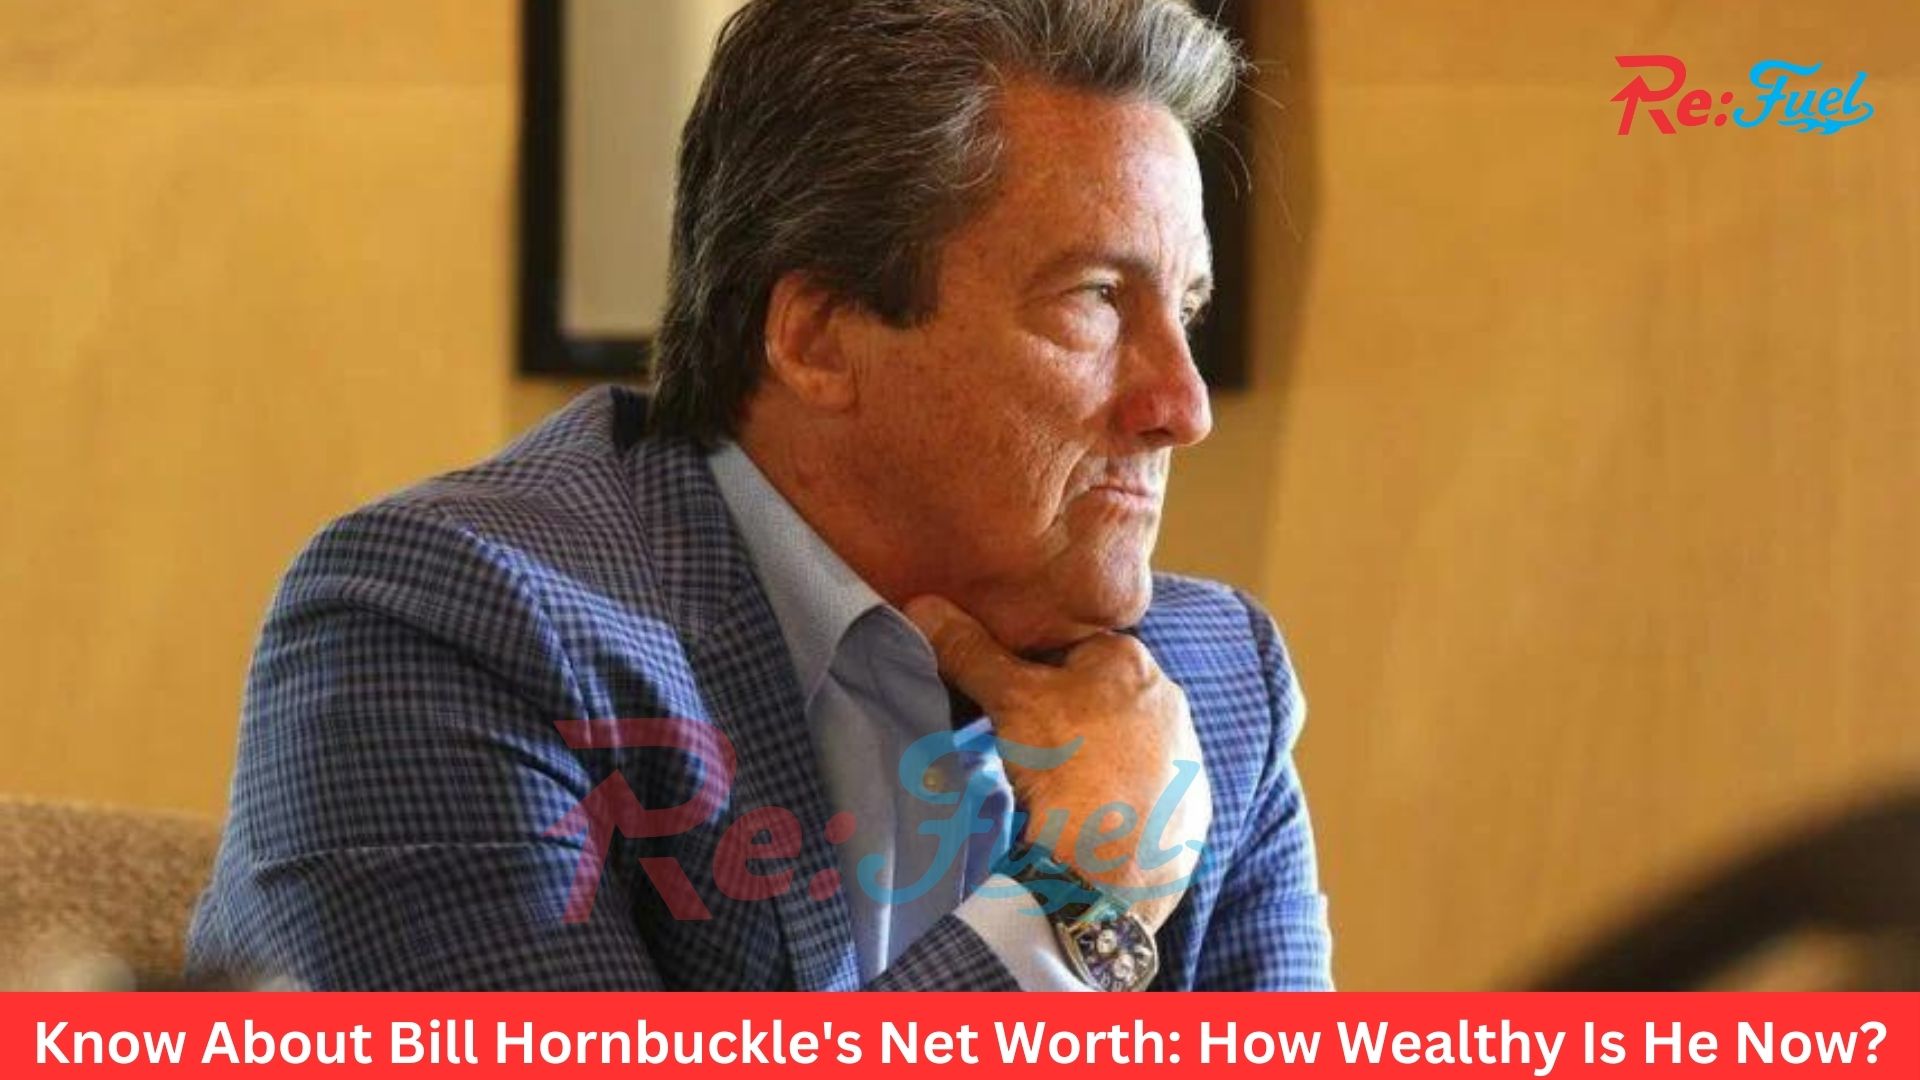 Know About Bill Hornbuckle's Net Worth: How Wealthy Is He Now?